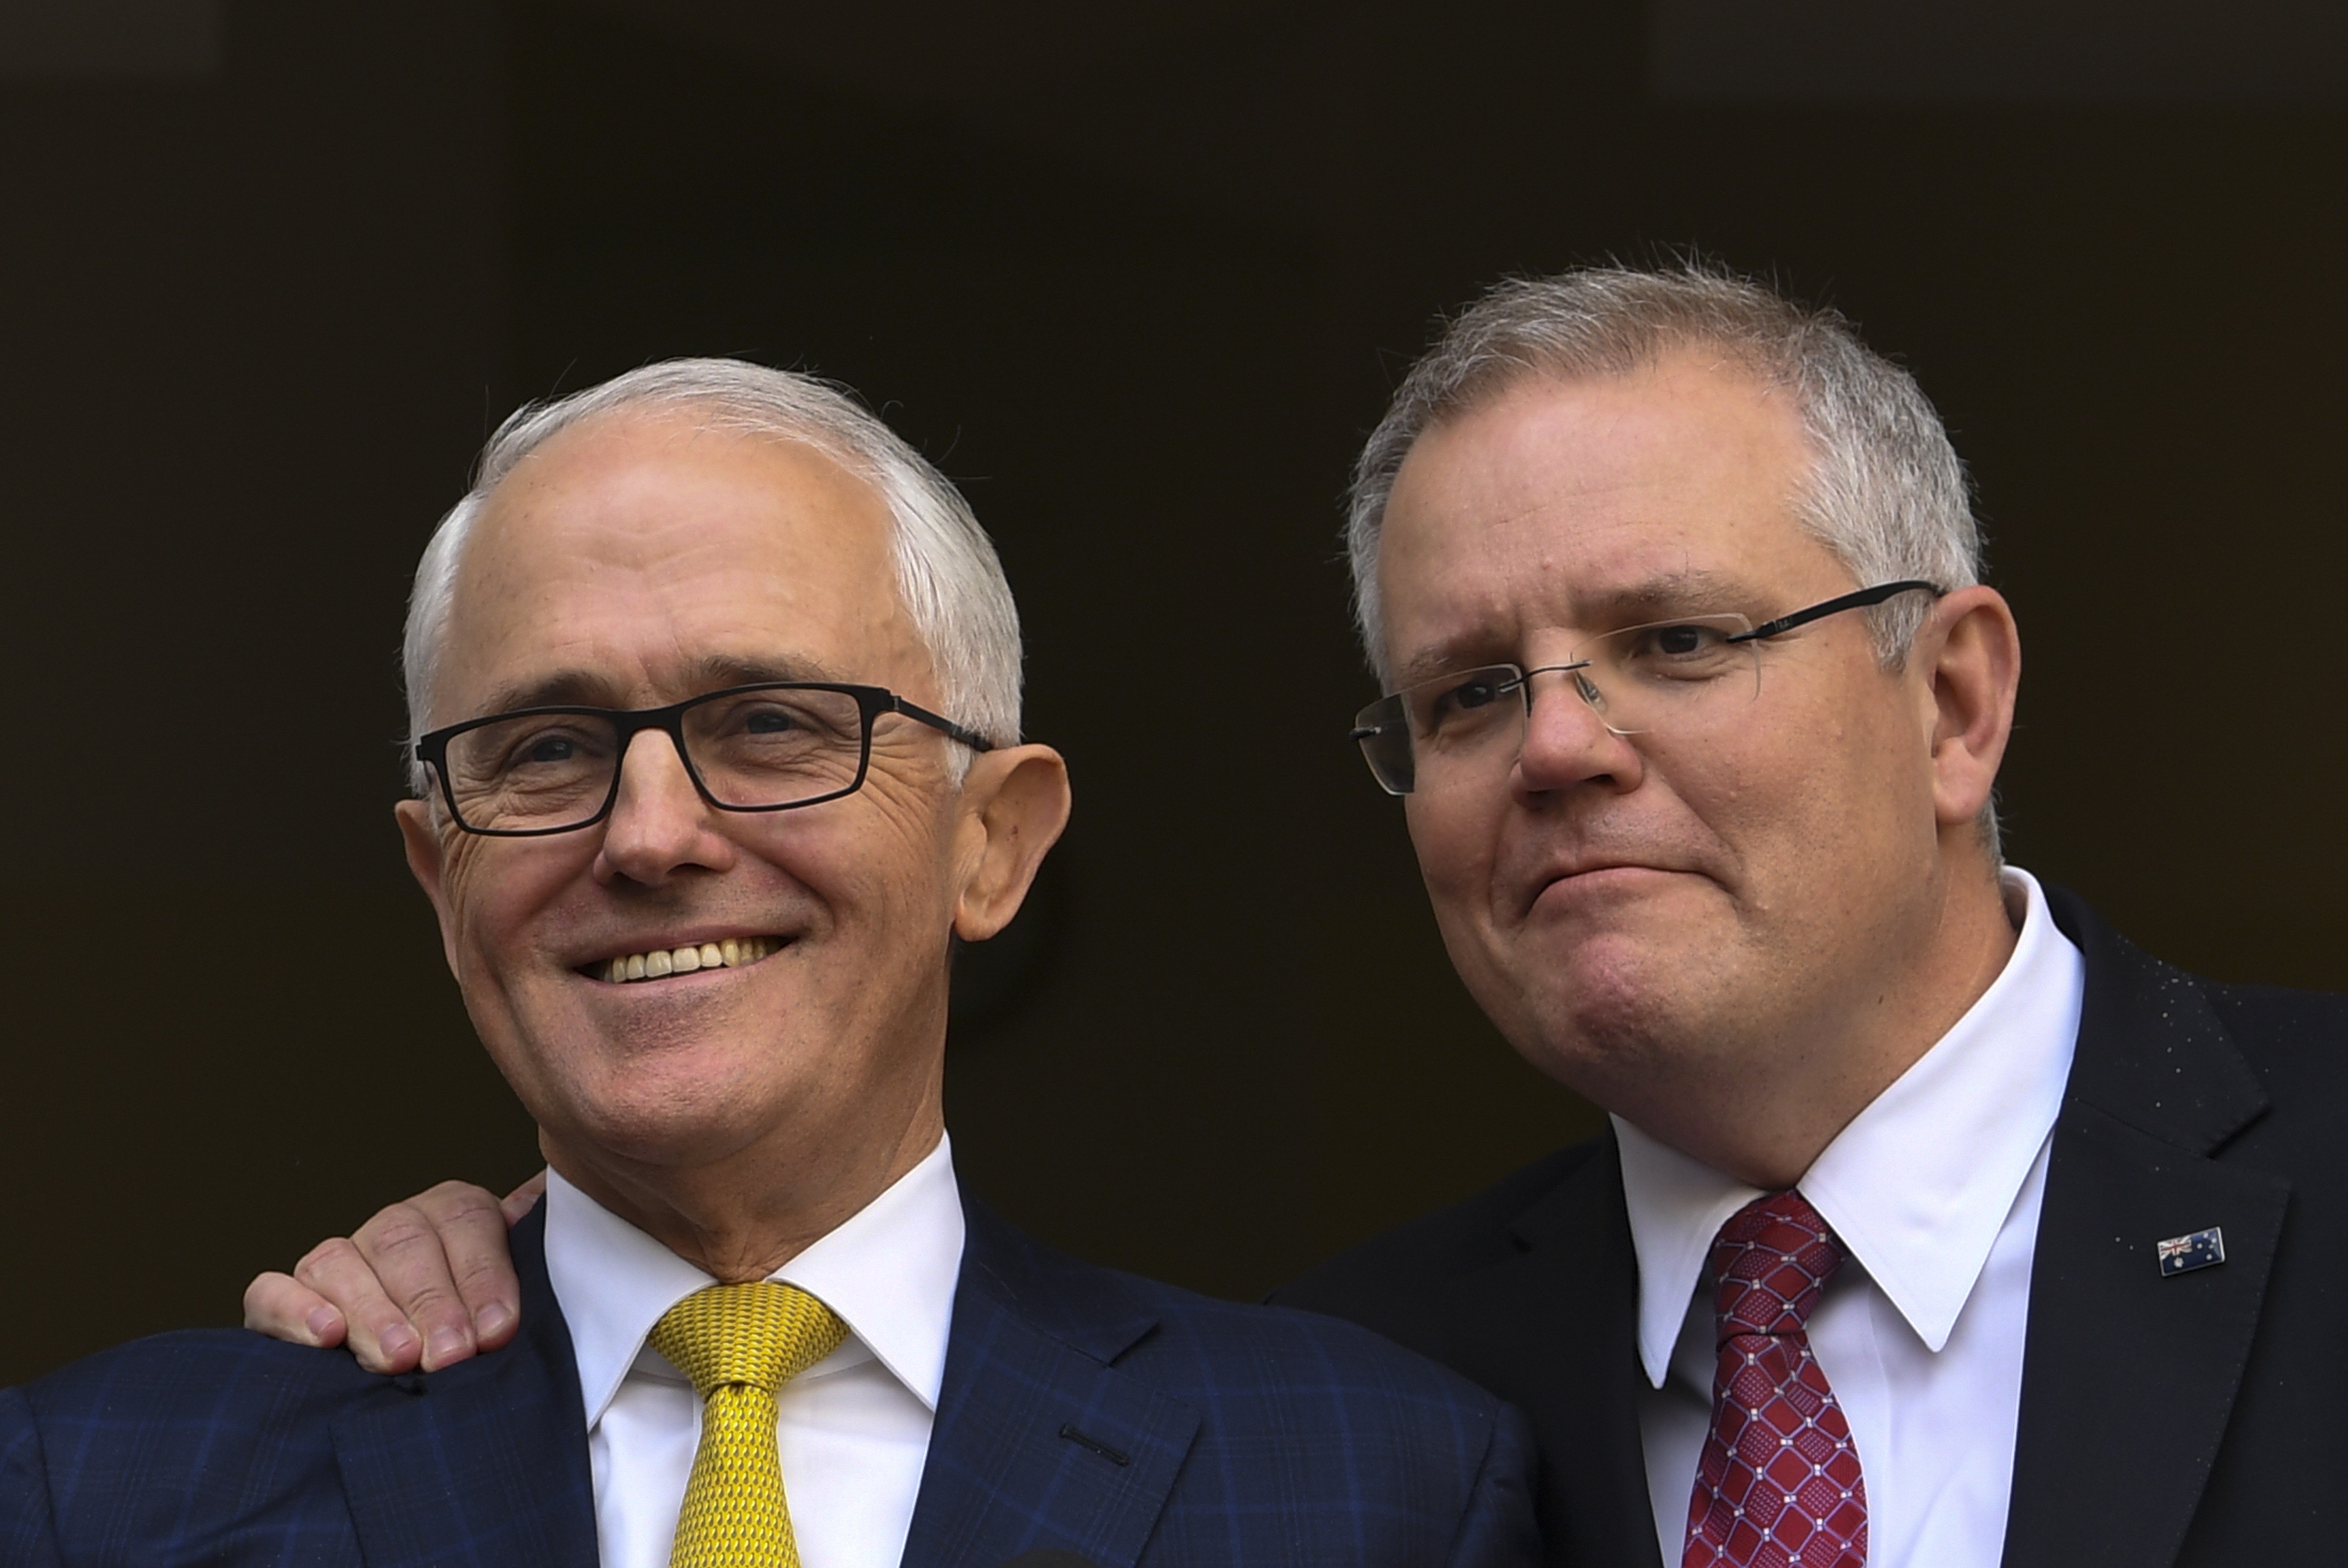 Scott Morrison (right), Australia’s new prime minister, with Malcolm Turnbull, his predecessor, during a press conference at Parliament House in Canberra on August 22, when Turnbull was prime minister and Morrison his treasurer. Photo: EPA-EFE